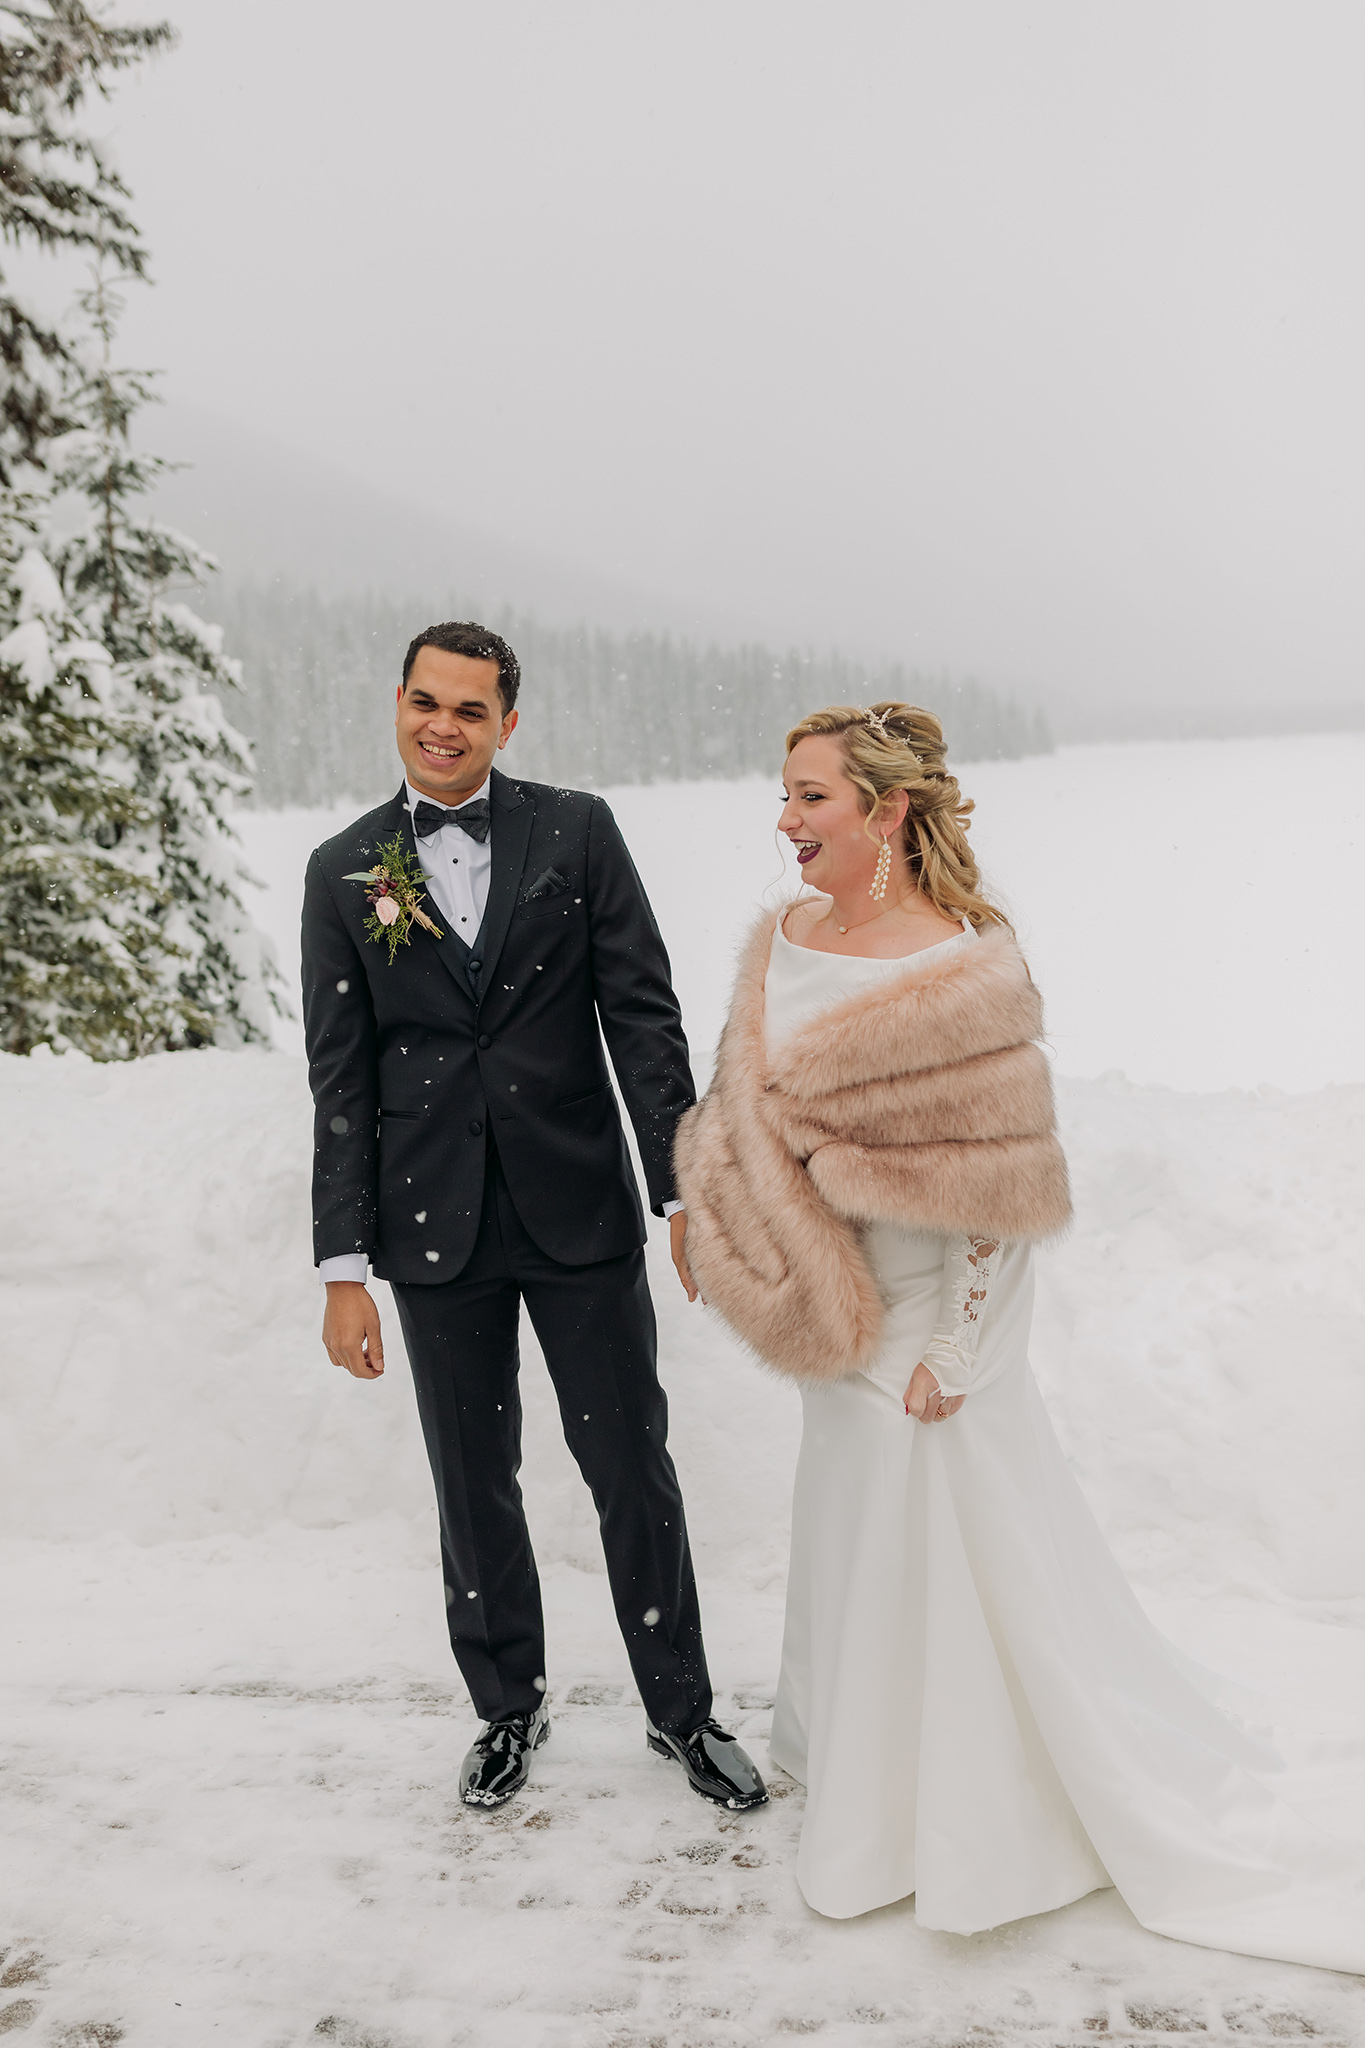 Emerald Lake Lodge outdoor winter wedding ceremony in a real life snowglobe photographed by mountain elopement photographer ENV Photography